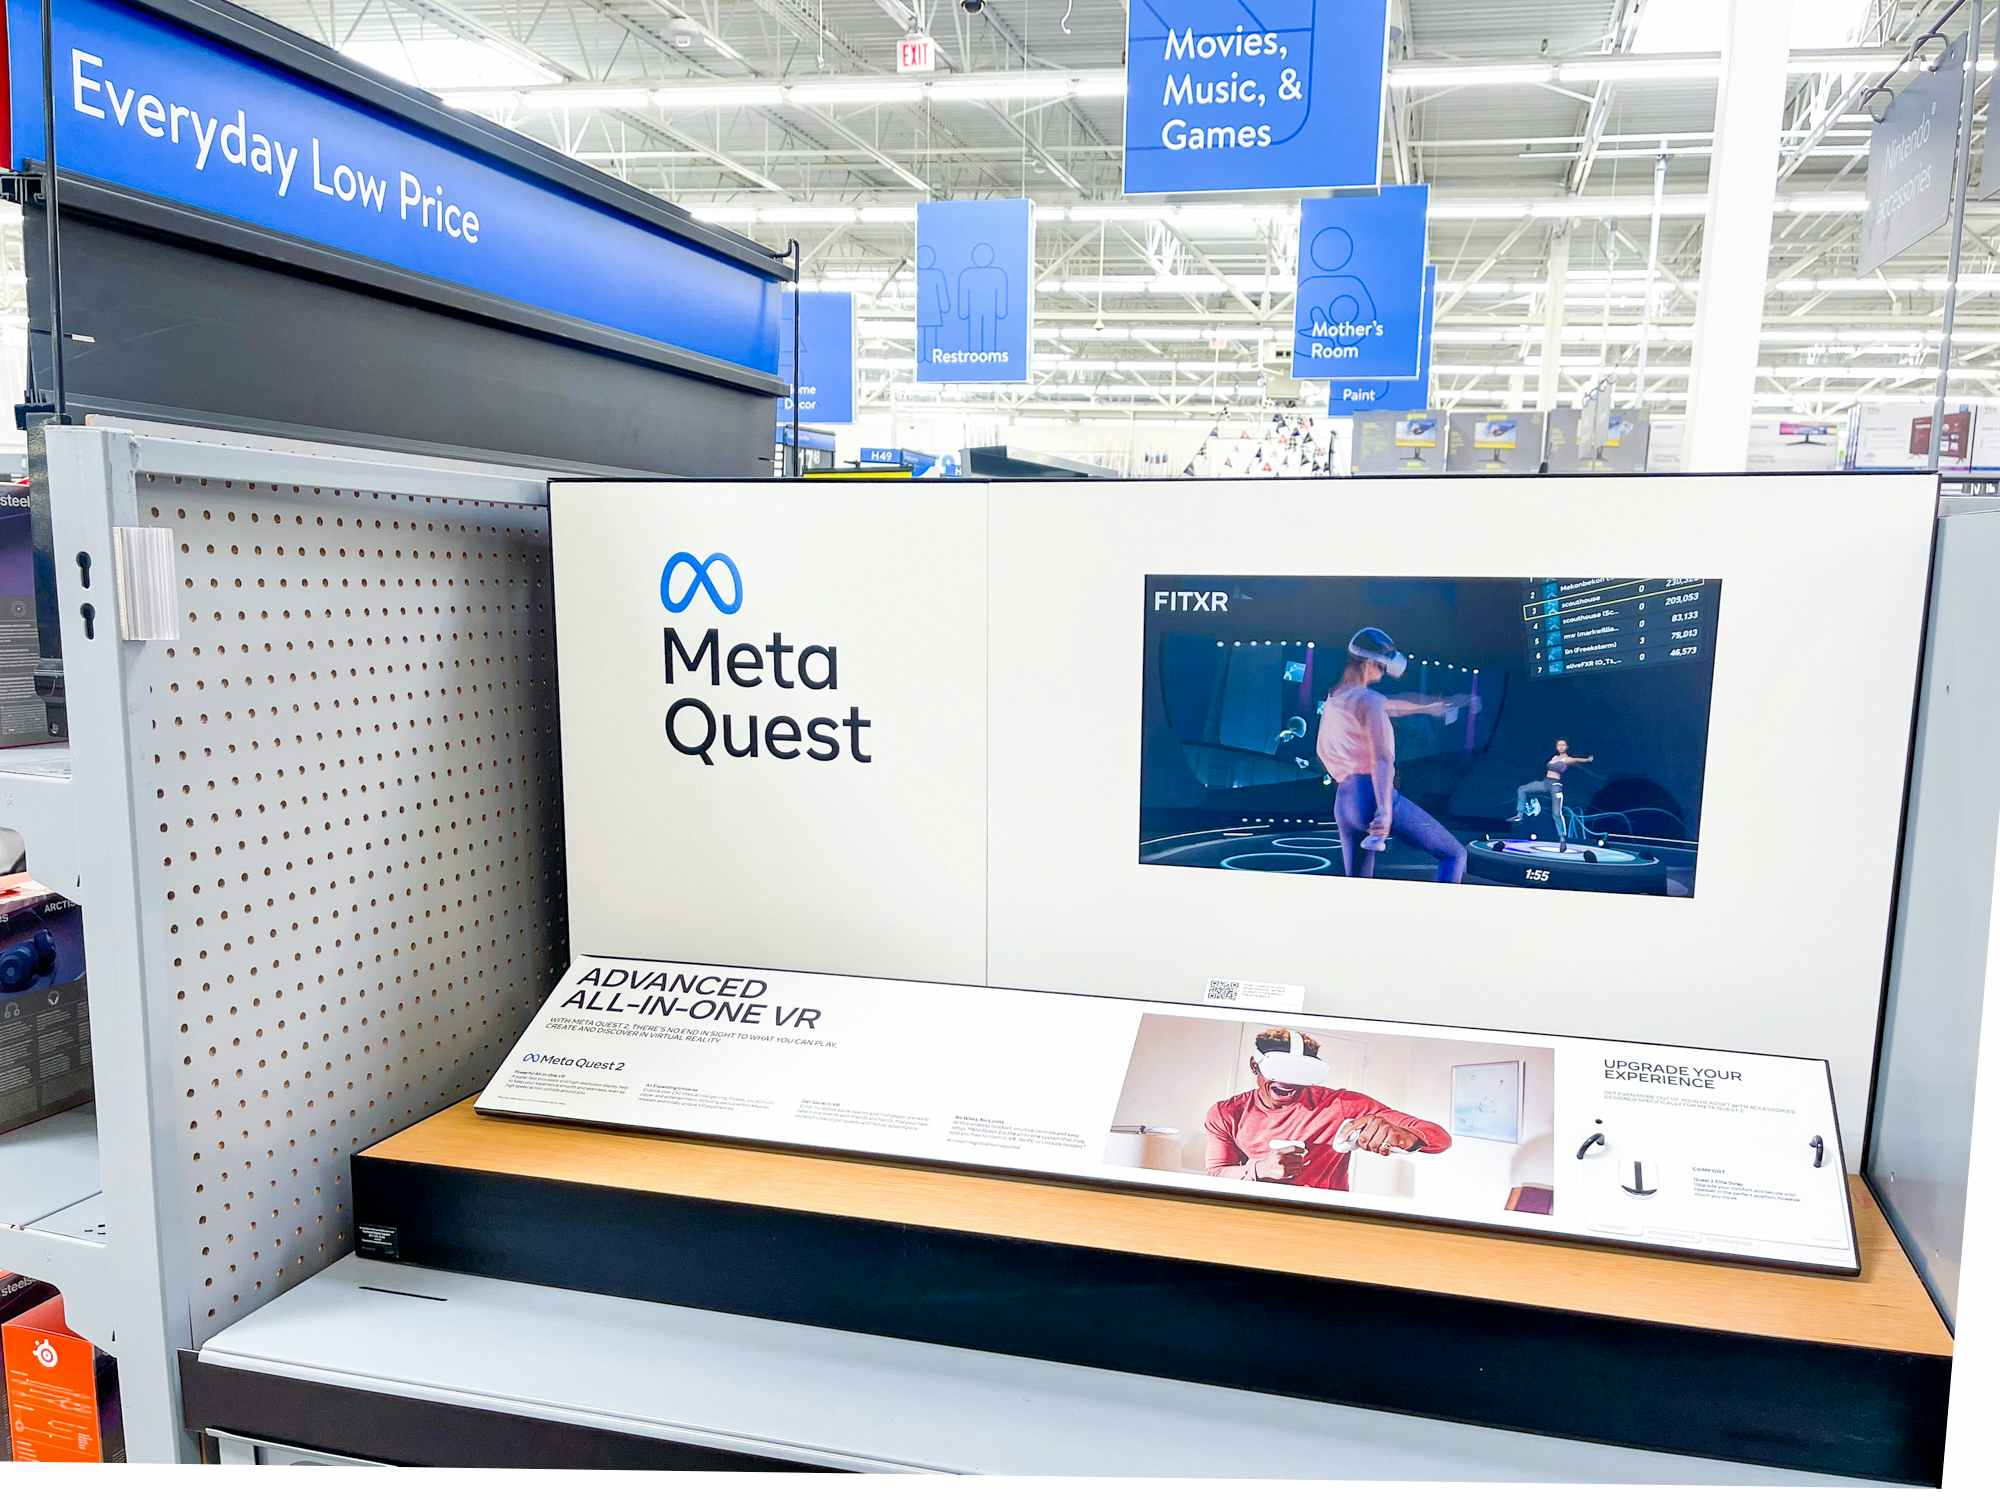 The Meta Quest display in the electronics department at Walmart